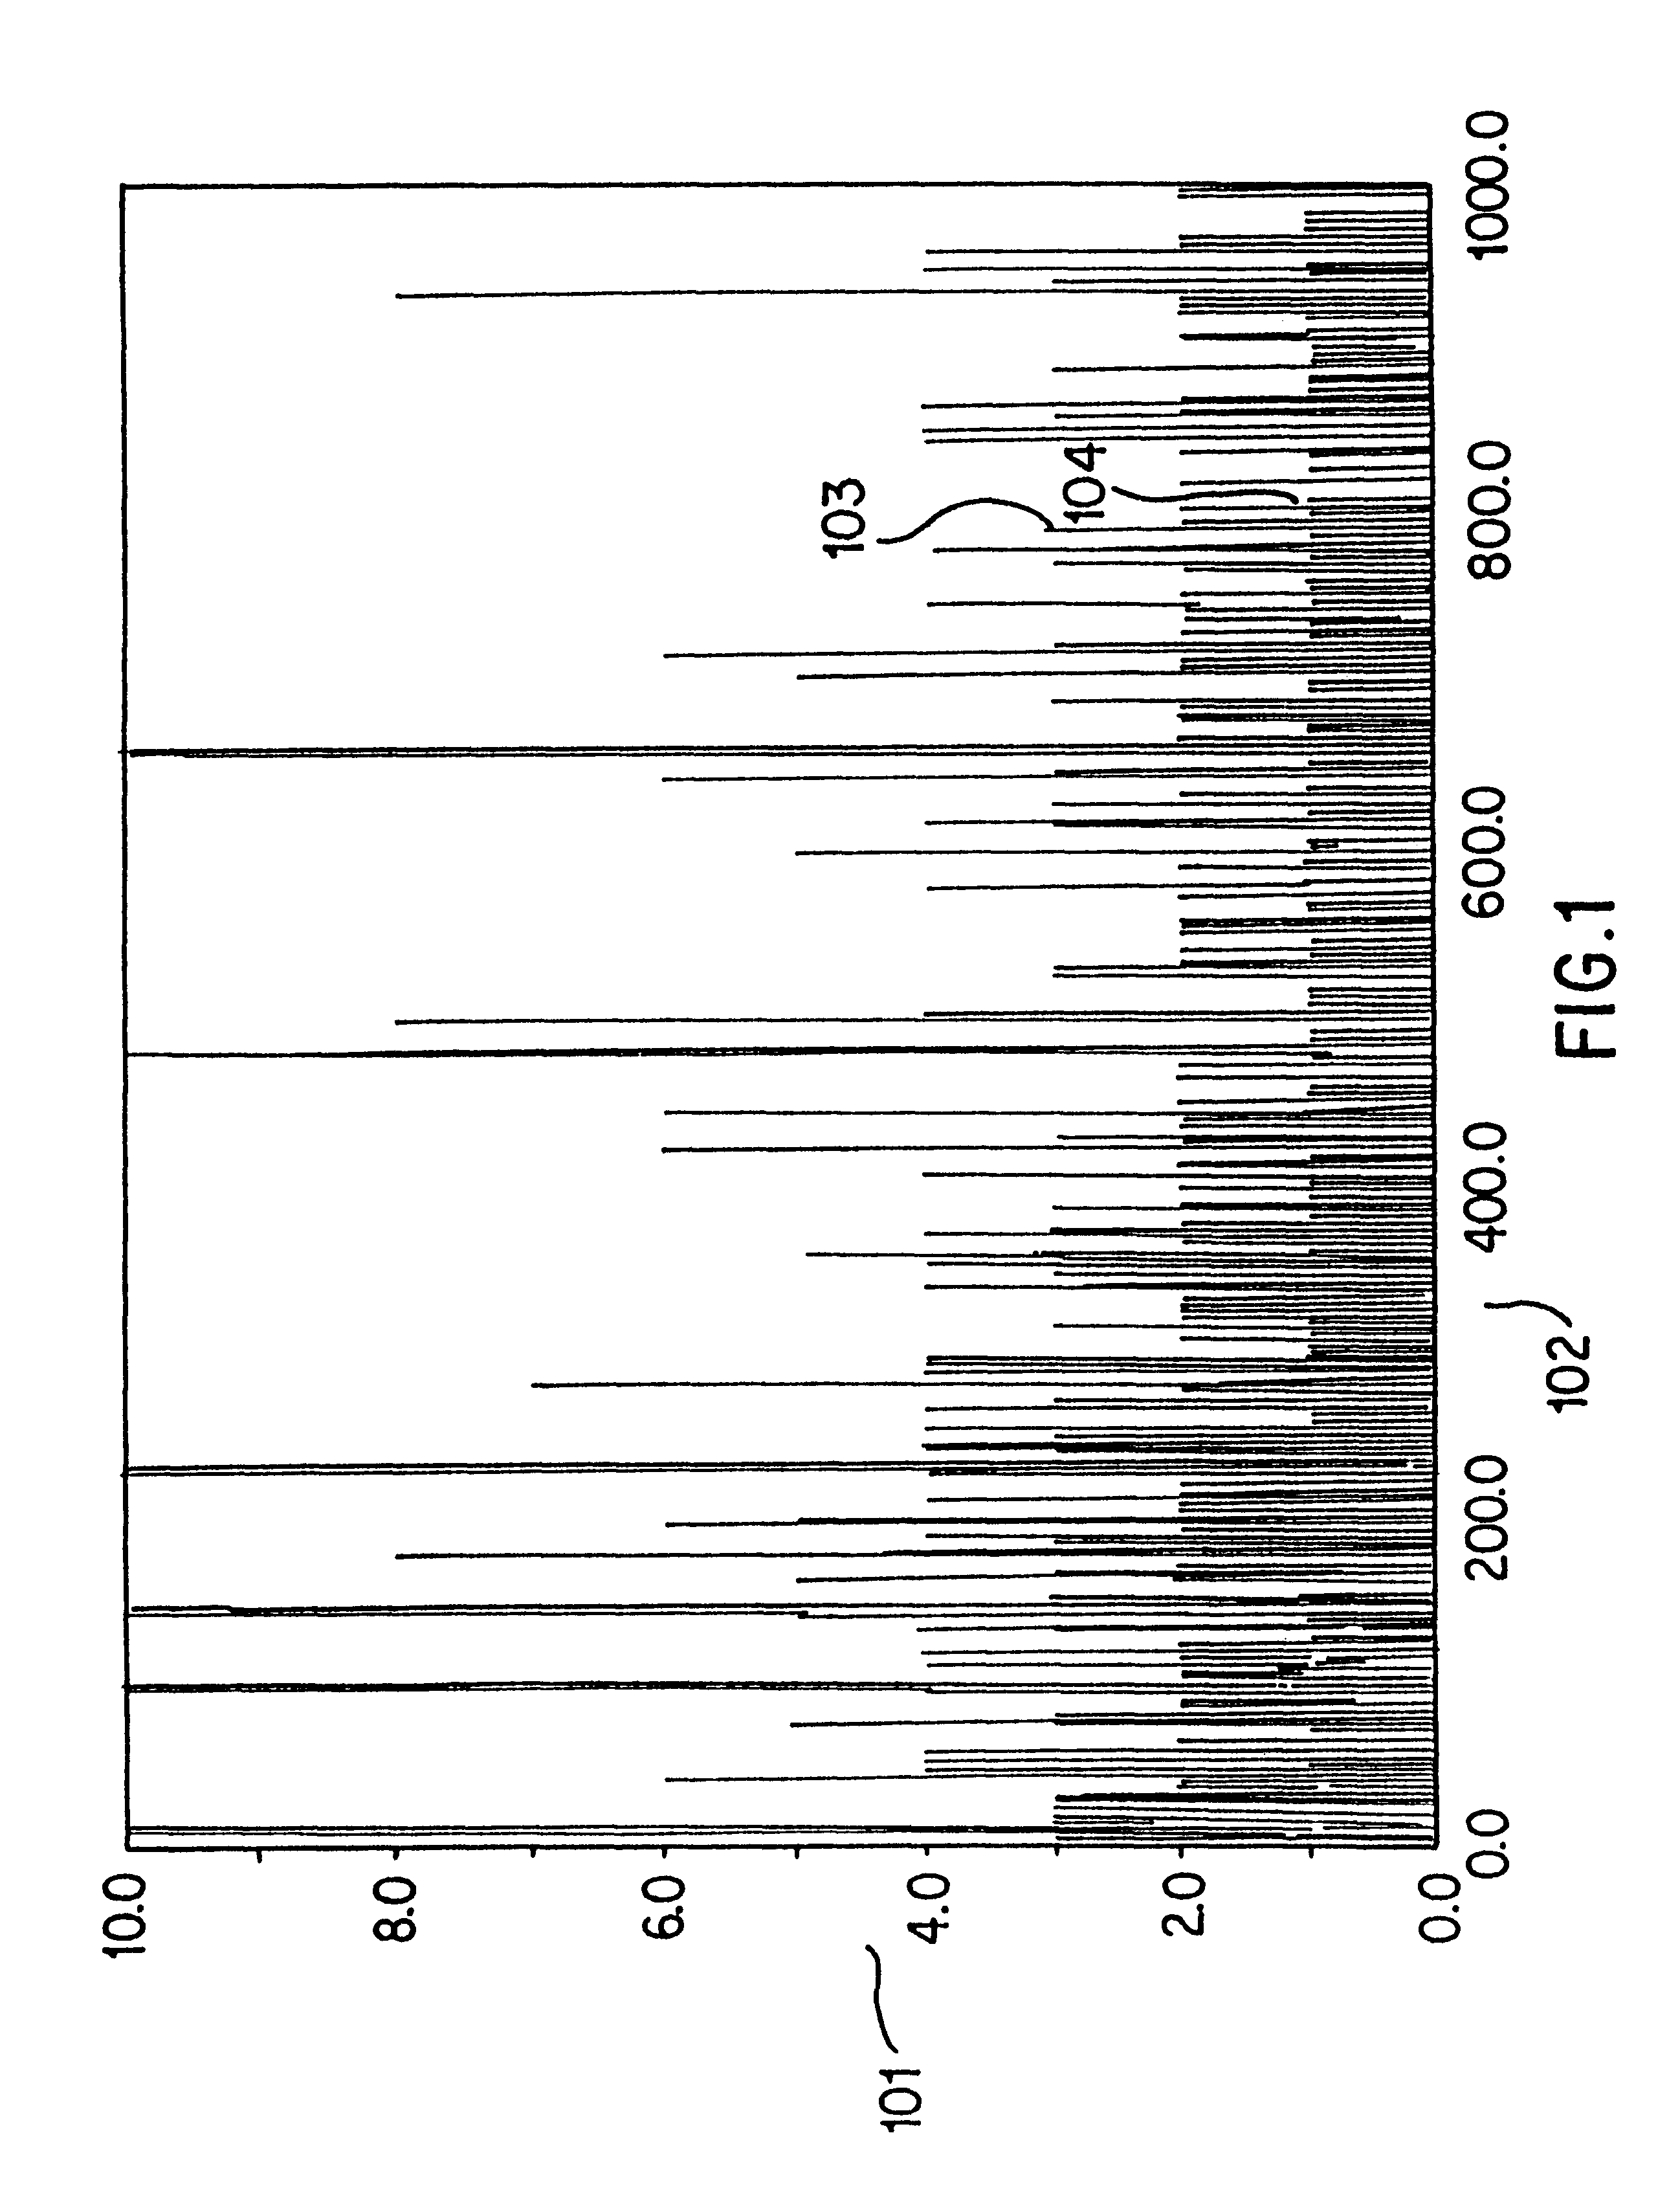 Method and apparatus for identifying, classifying, or quantifying protein sequences in a sample without sequencing